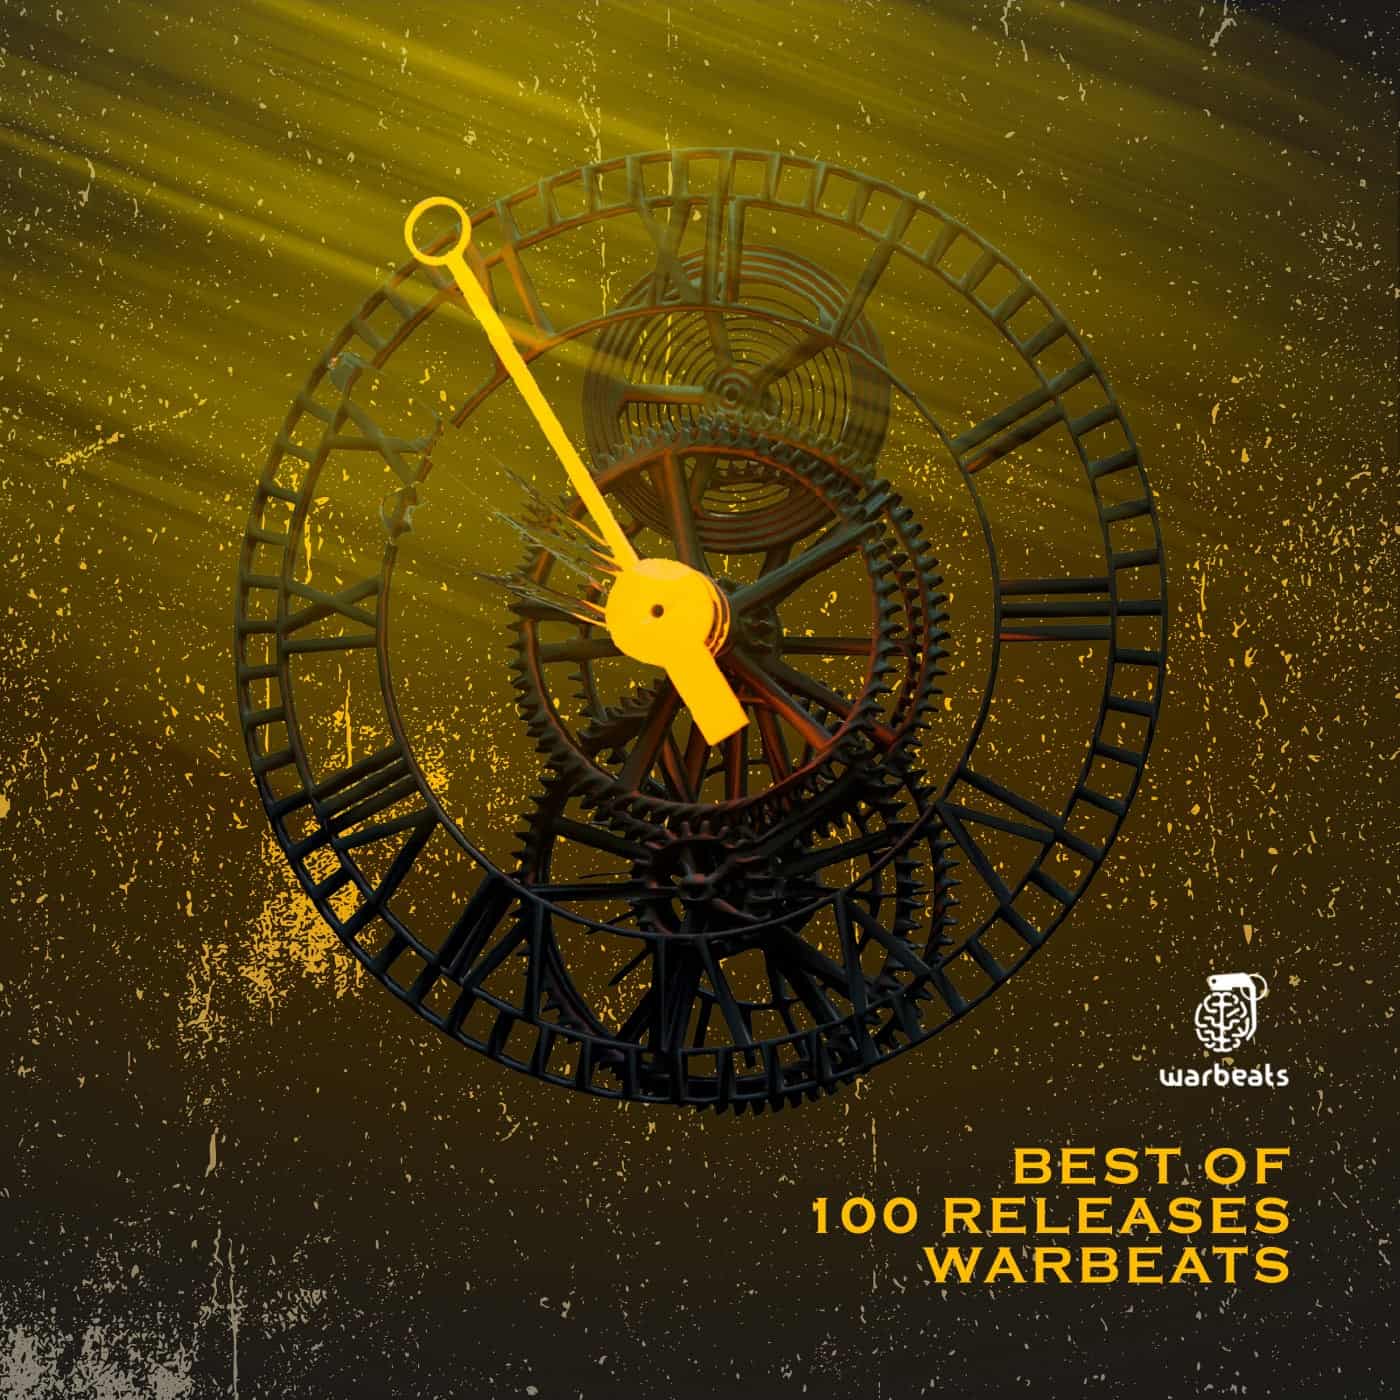 Download VA - Best of 100 Releases Warbeats on Electrobuzz